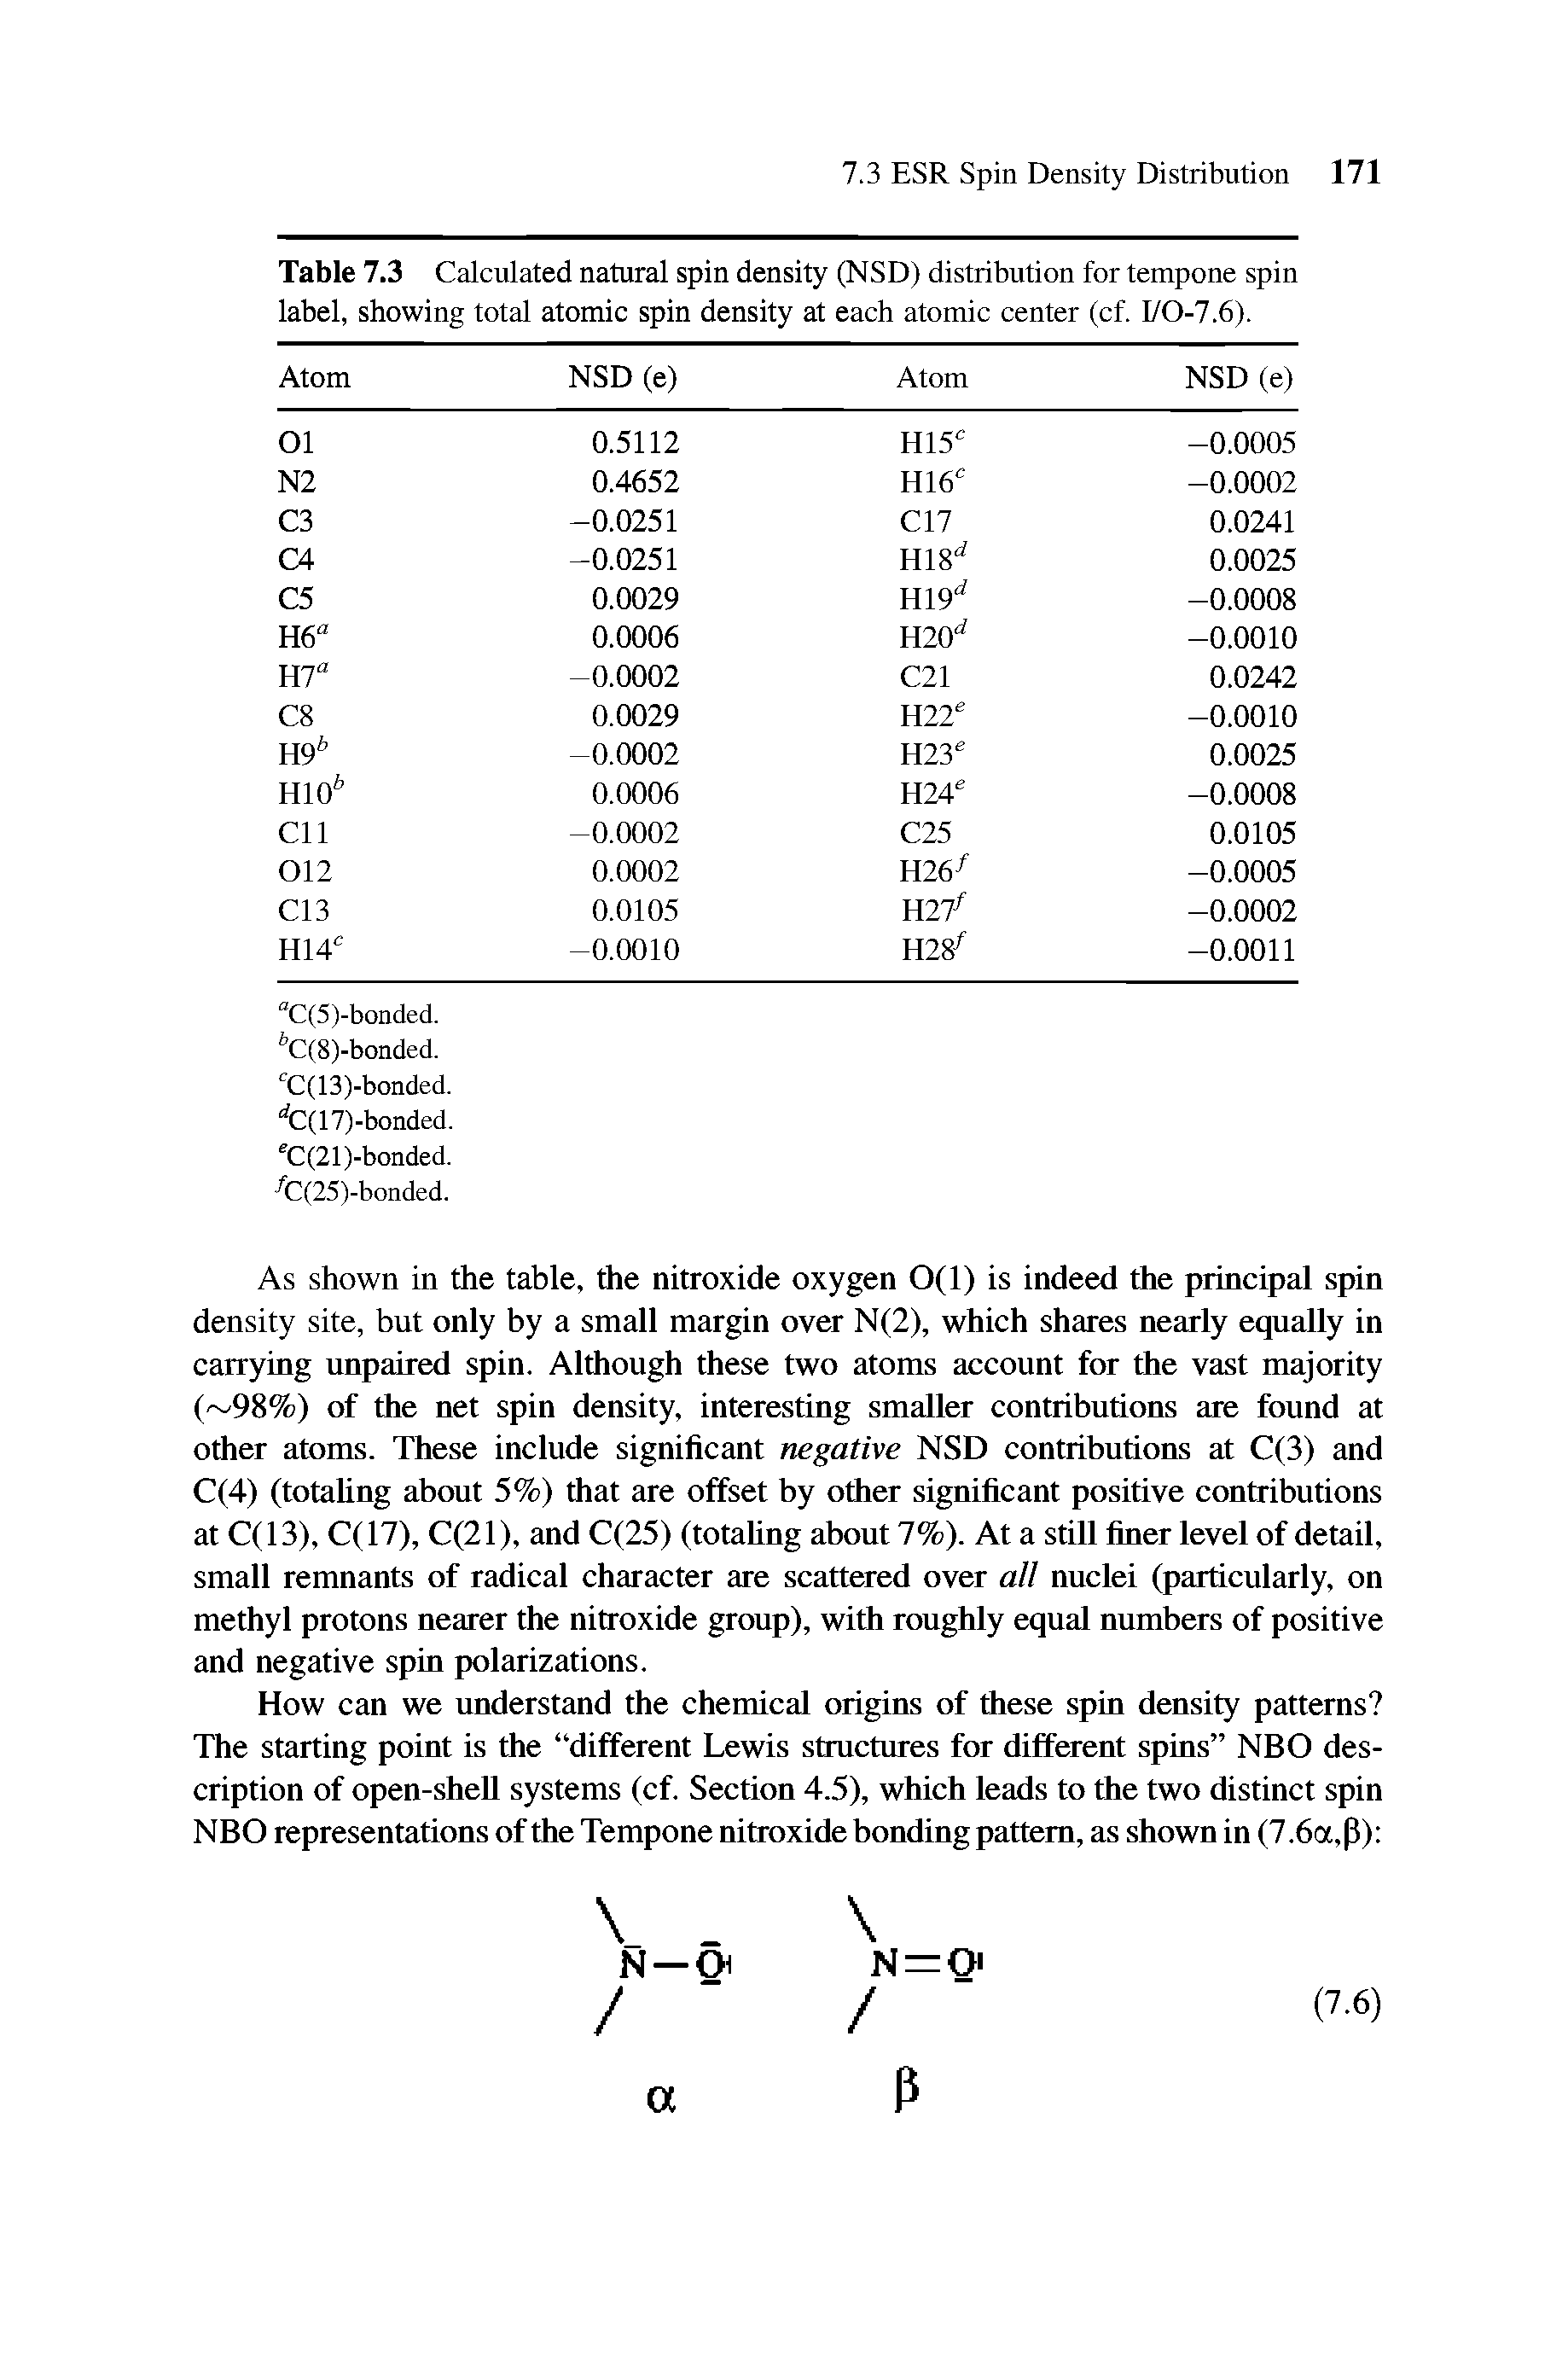 Table 7.3 Calculated natural spin density (NSD) distribution for tempone spin label, showing total atomic spin density at each atomic center (cf. 1/0-7.6). ...